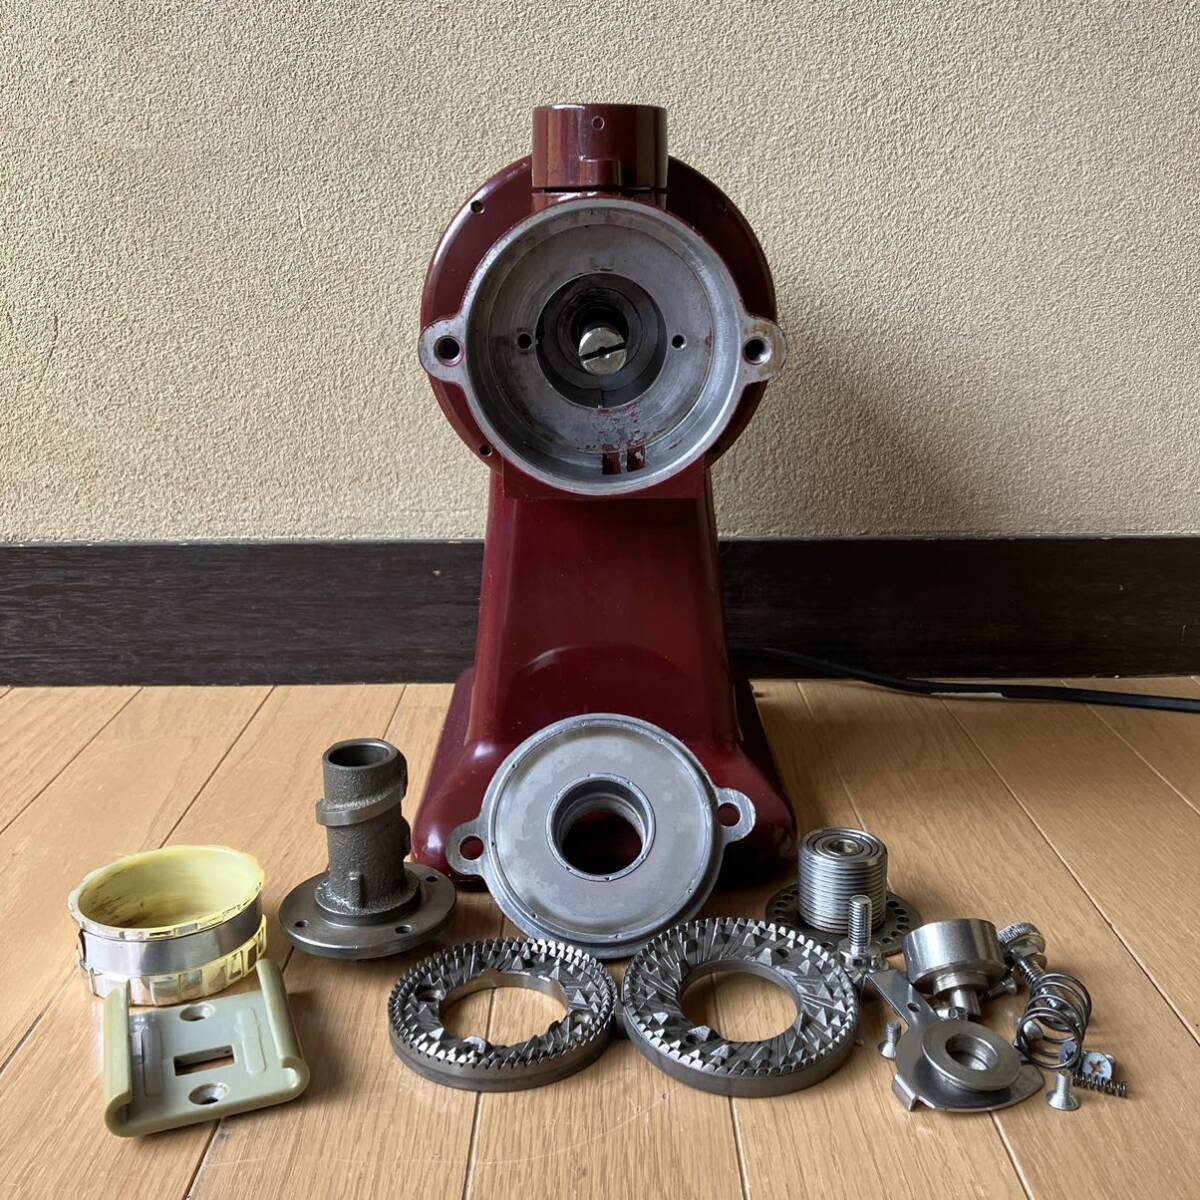  disassembly cleaning being completed Carita kalita is ikatto Mill coffee mill search Nice cut Mill Fuji royal R-440 grinder red width type 